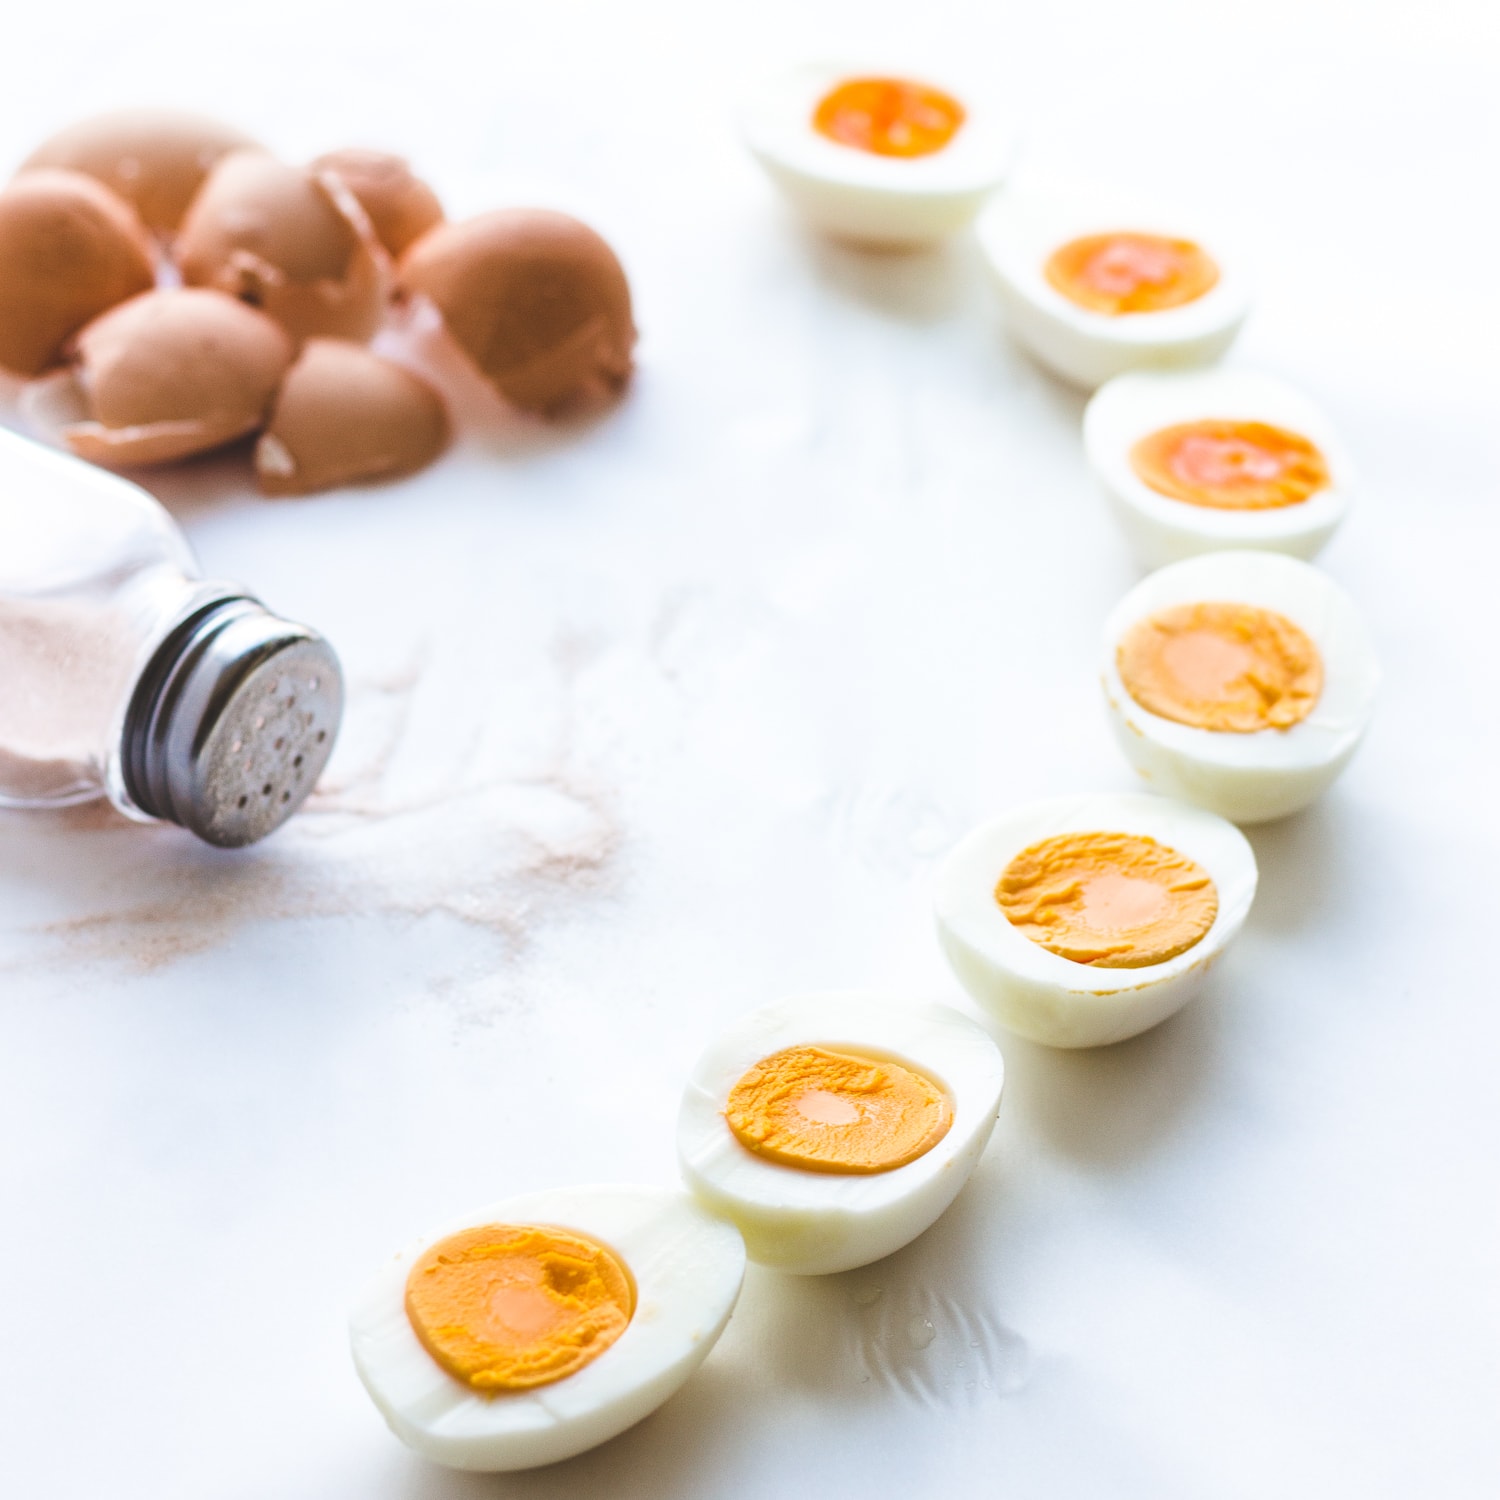 Hard boiled eggs lined up in a curved shape with egg shell and salt shaker in the corner.